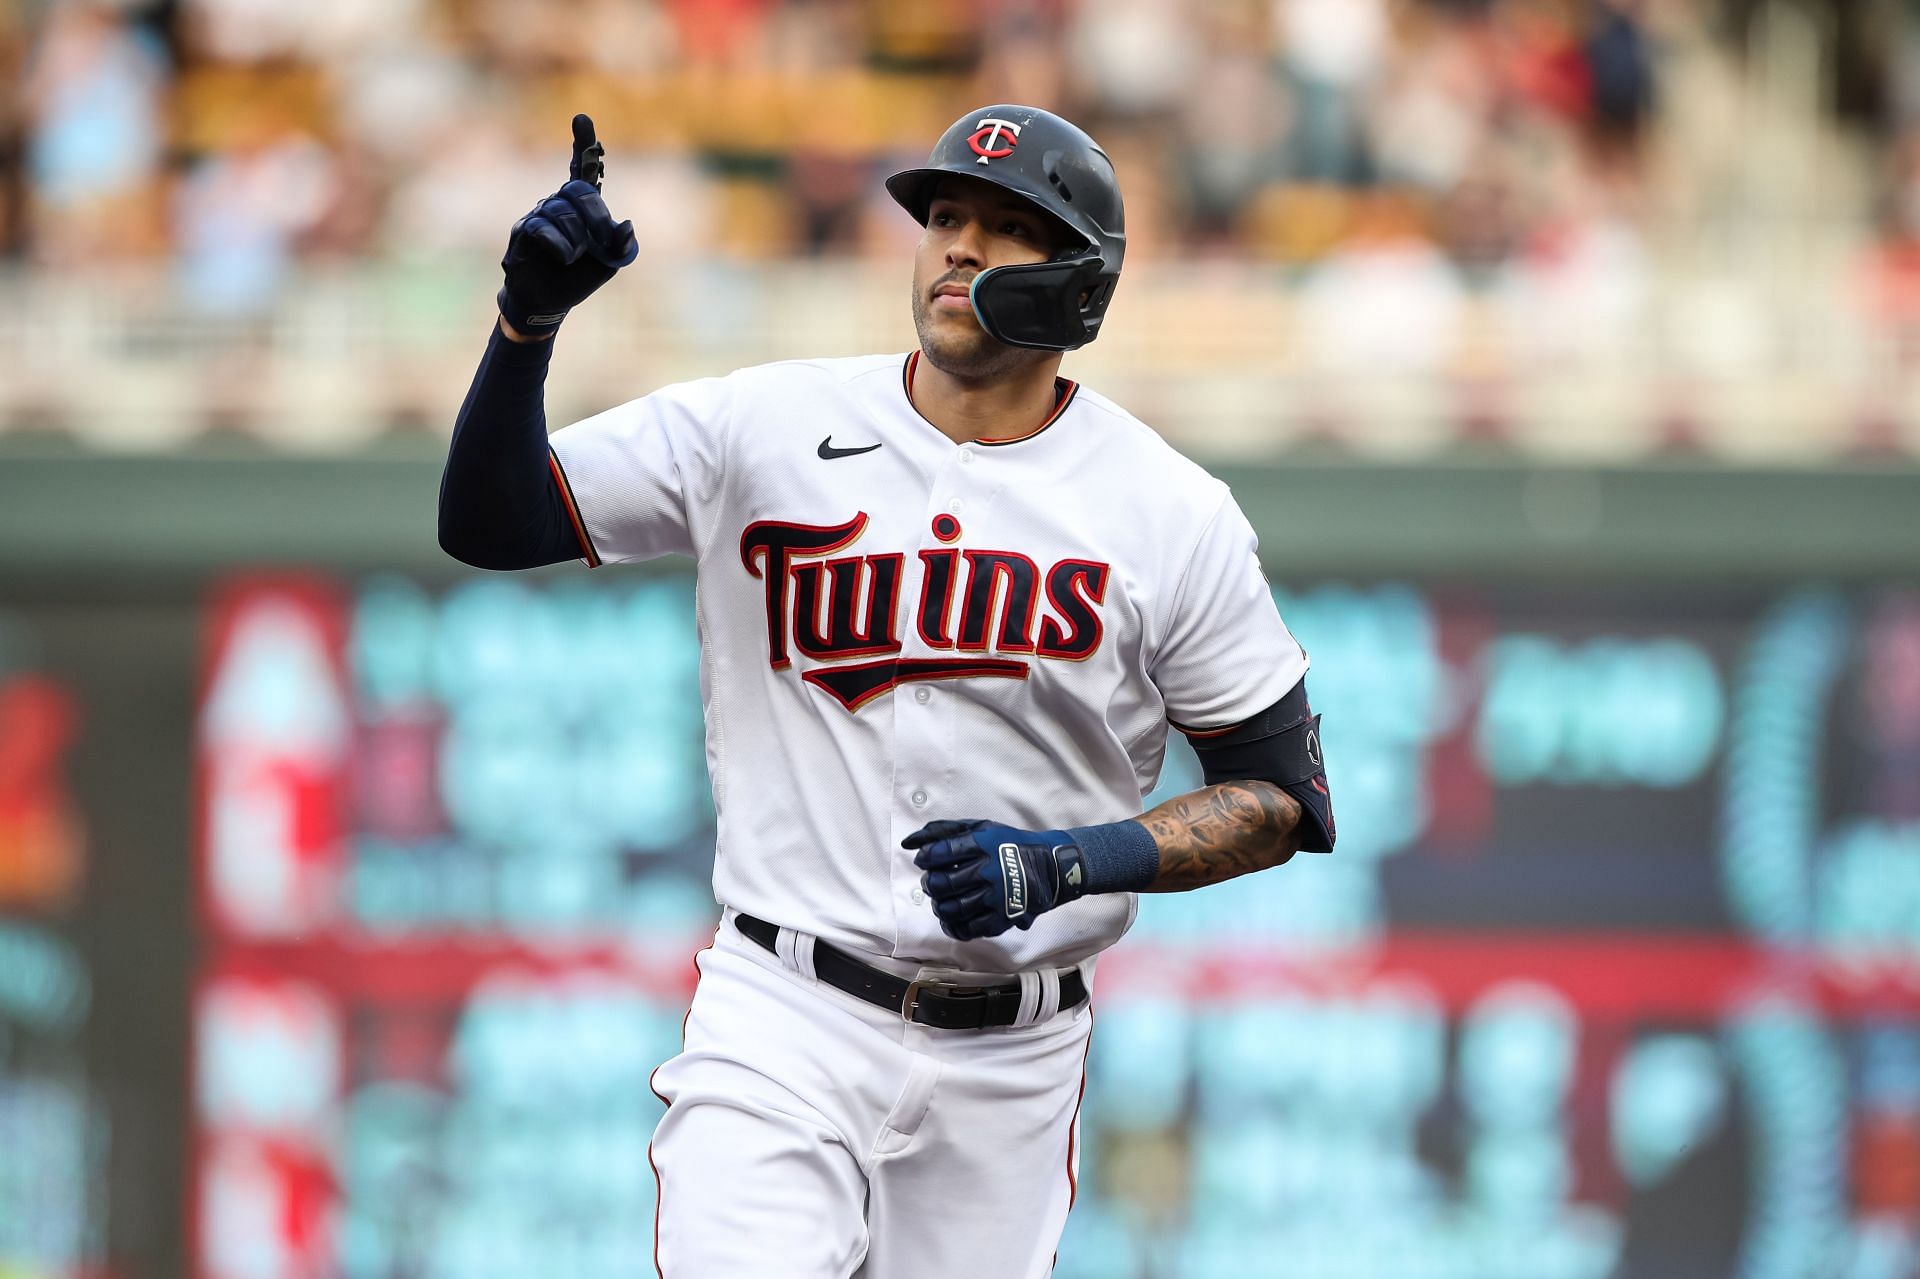 Carlos Correa of the Minnesota Twins celebrates his solo home run as he rounds the bases.